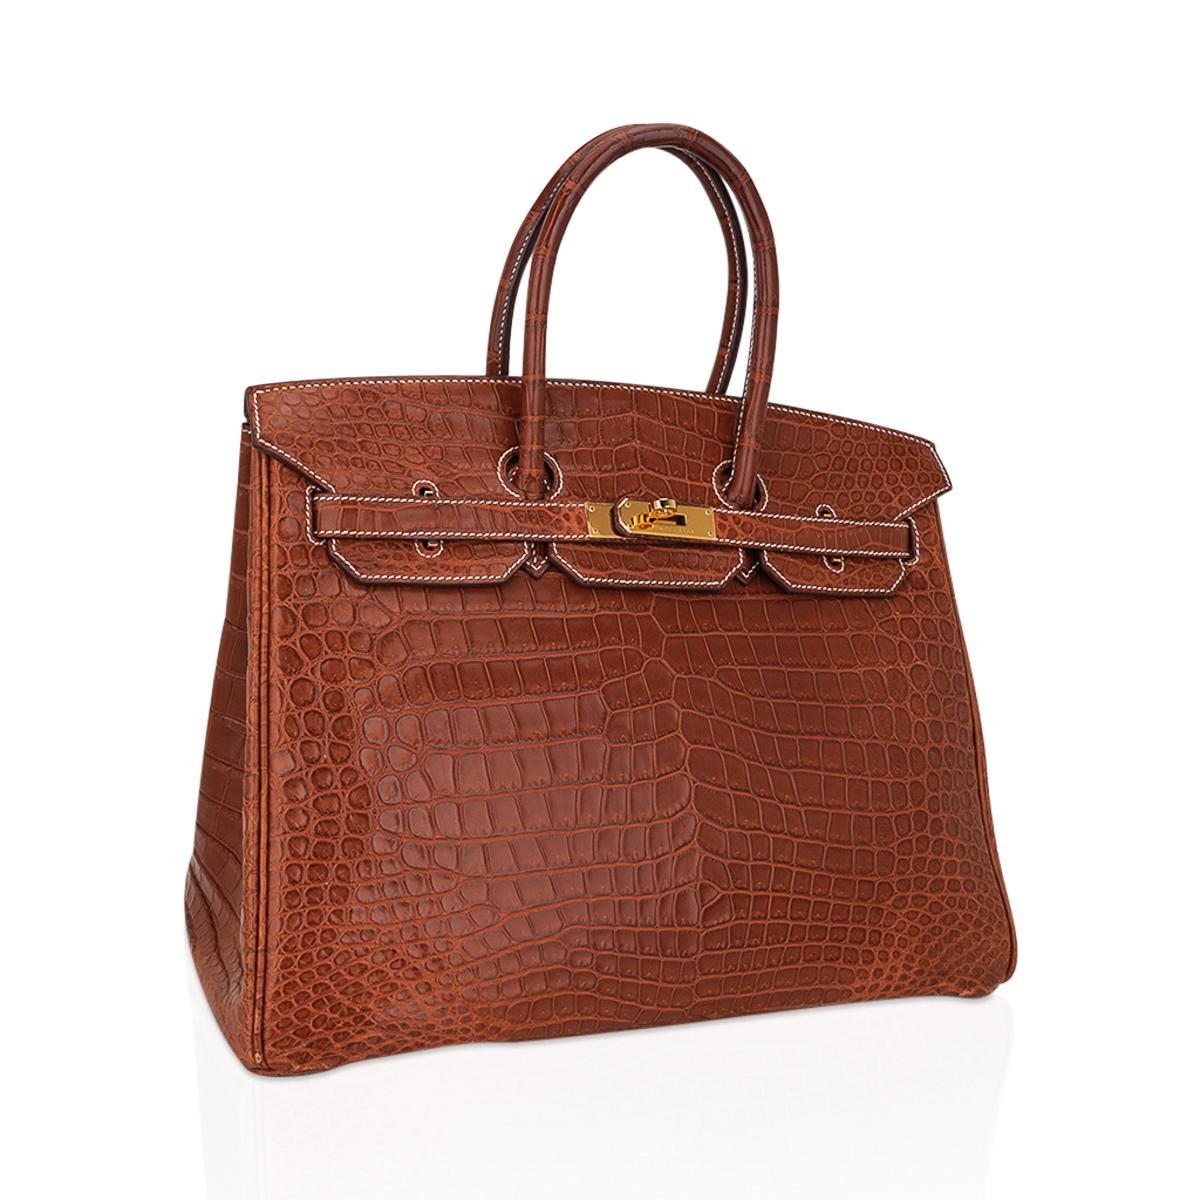 Mightychic offers an Hermes Birkin 35 bag featured in matte Fauve Porosus Crocodile.
Neutral perfection for year round wear, this chic bag is a must for any Hermes collector.
Rich with gold hardware and accentuated with the signature bone top